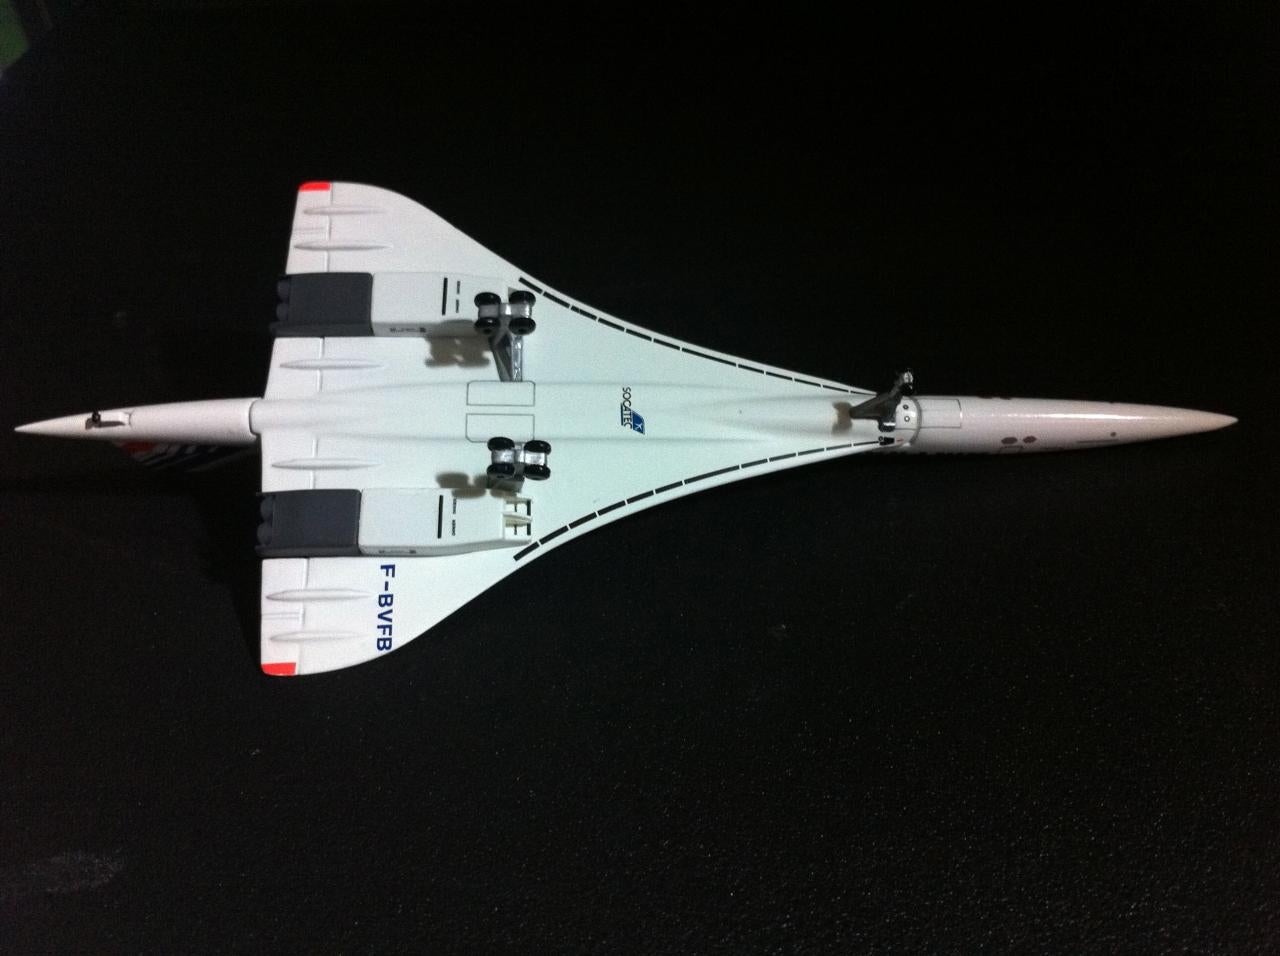 1/400 Socatec Air France Concorde not in database - Wings900 Discussion